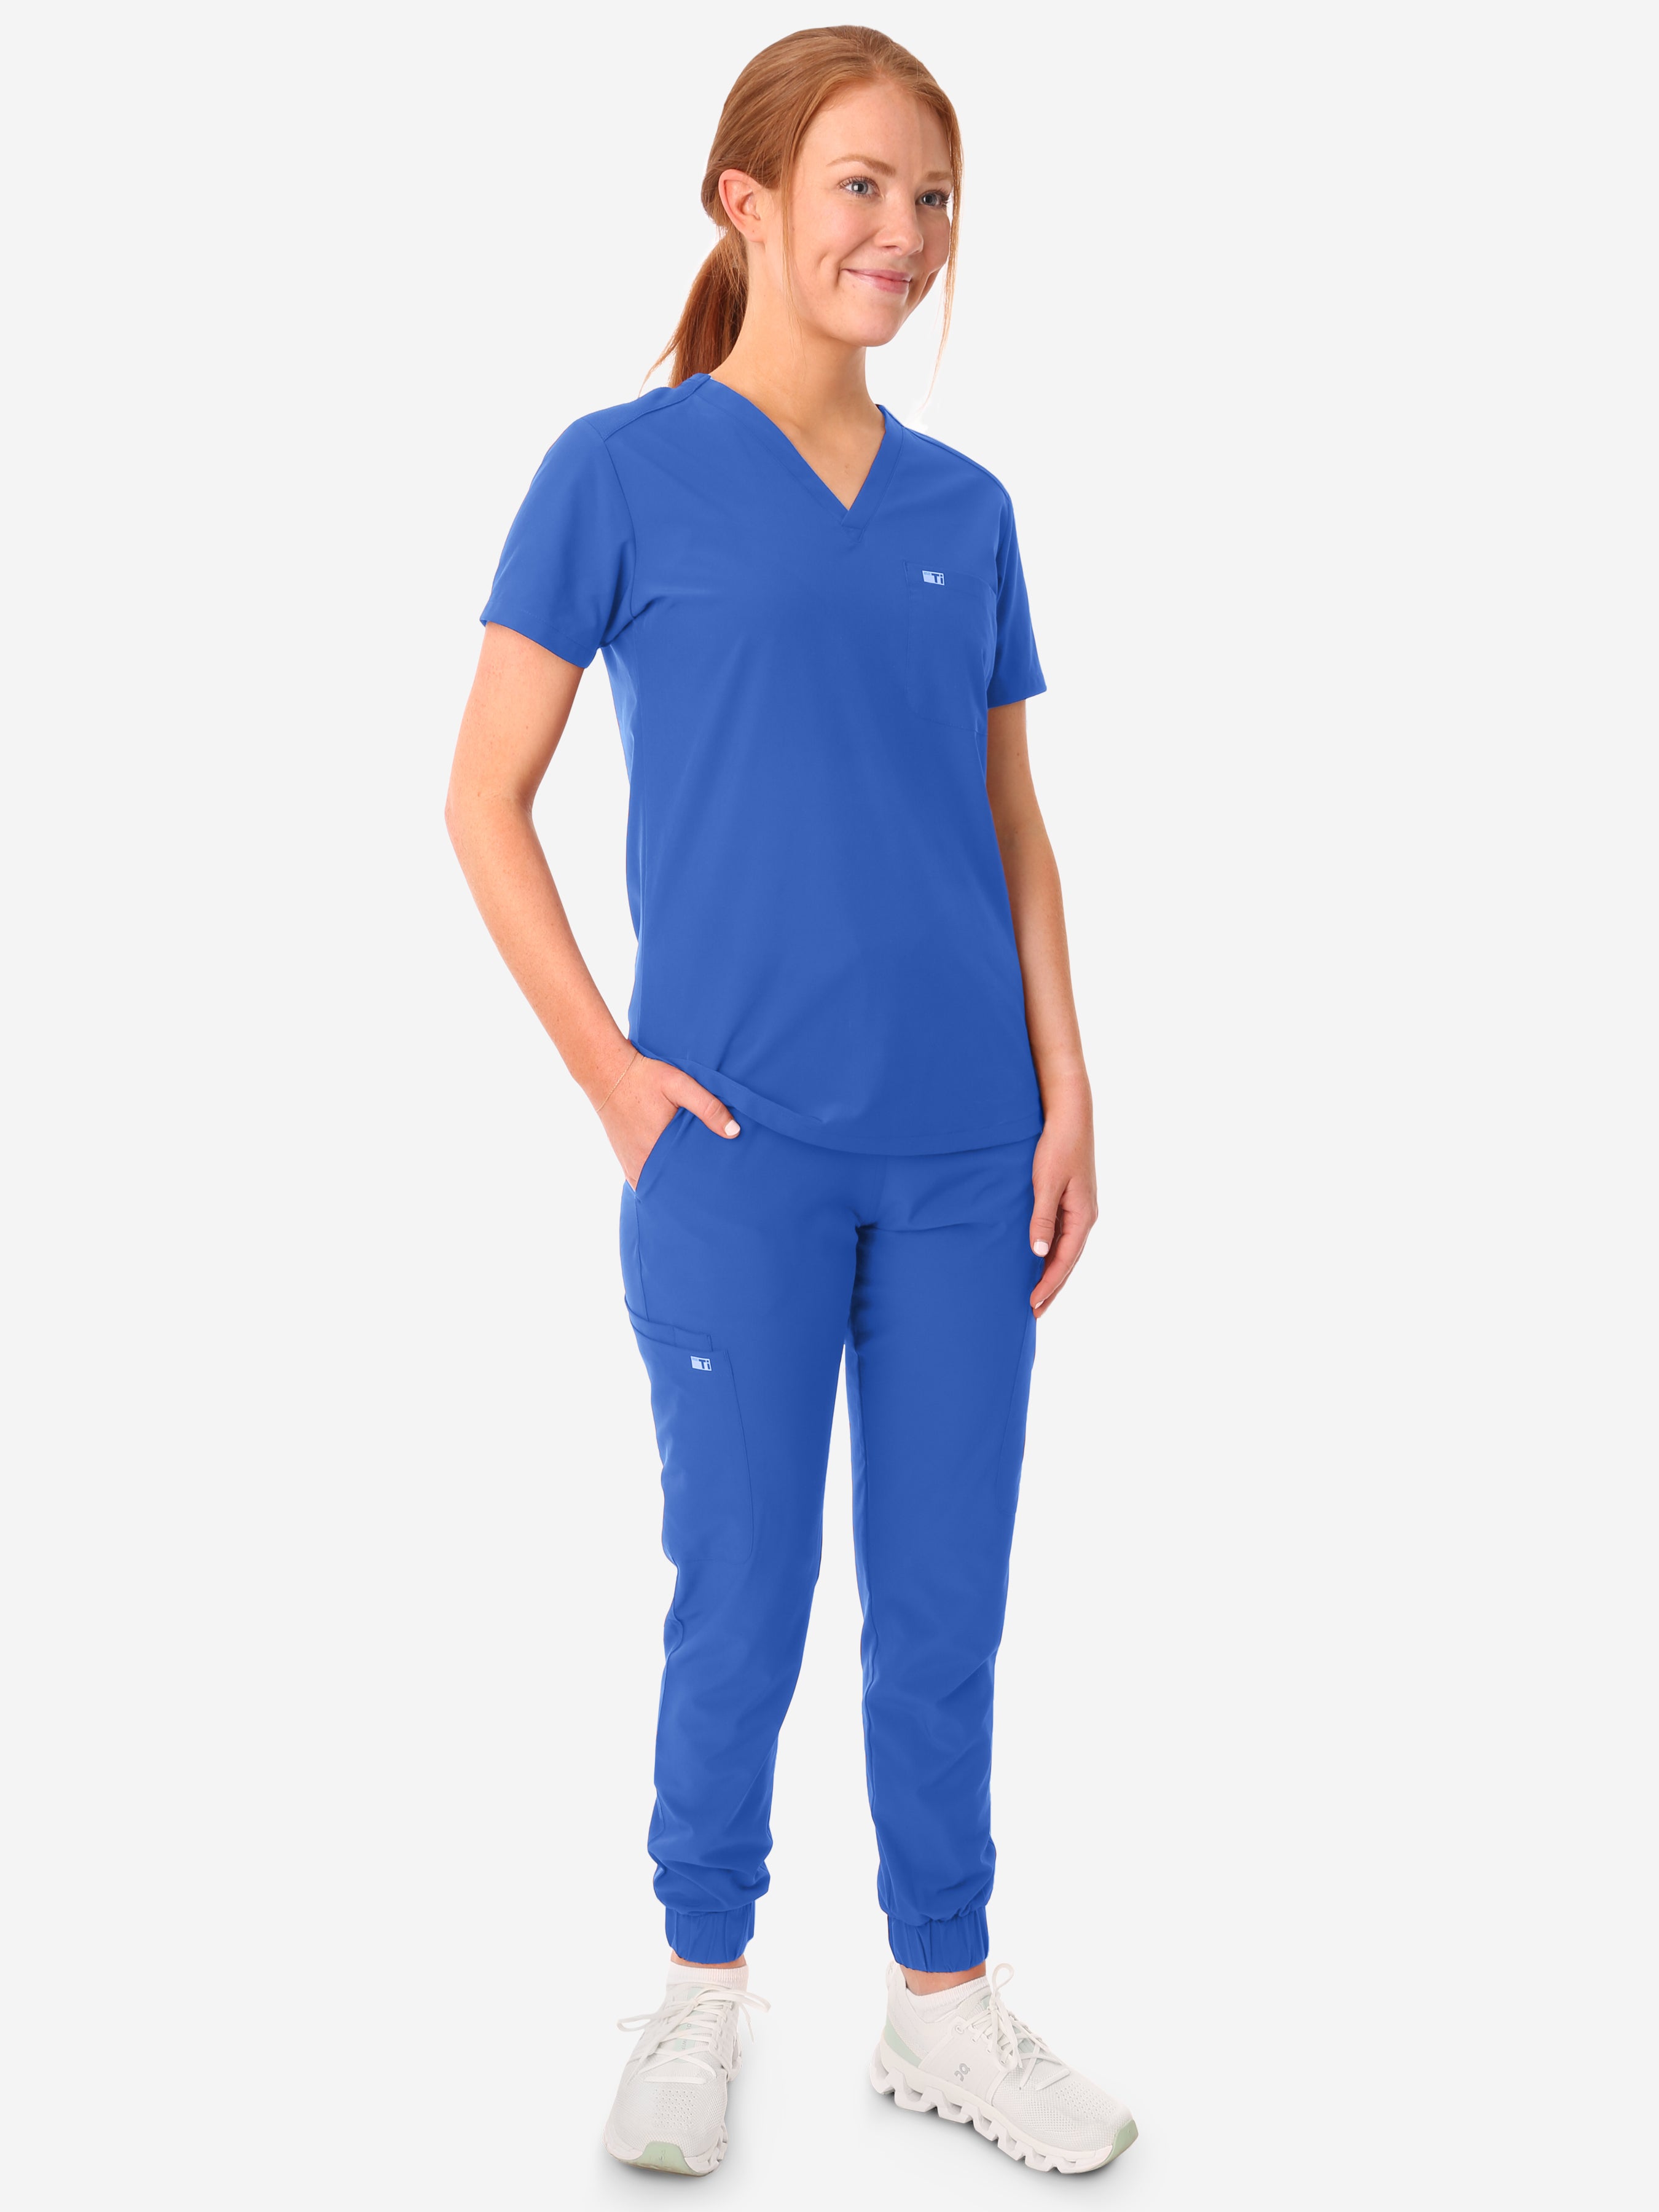 TiScrubs Women's Stretch Royal Blue One-Pocket Scrub Top Untucked with Joggers Front View Full Body